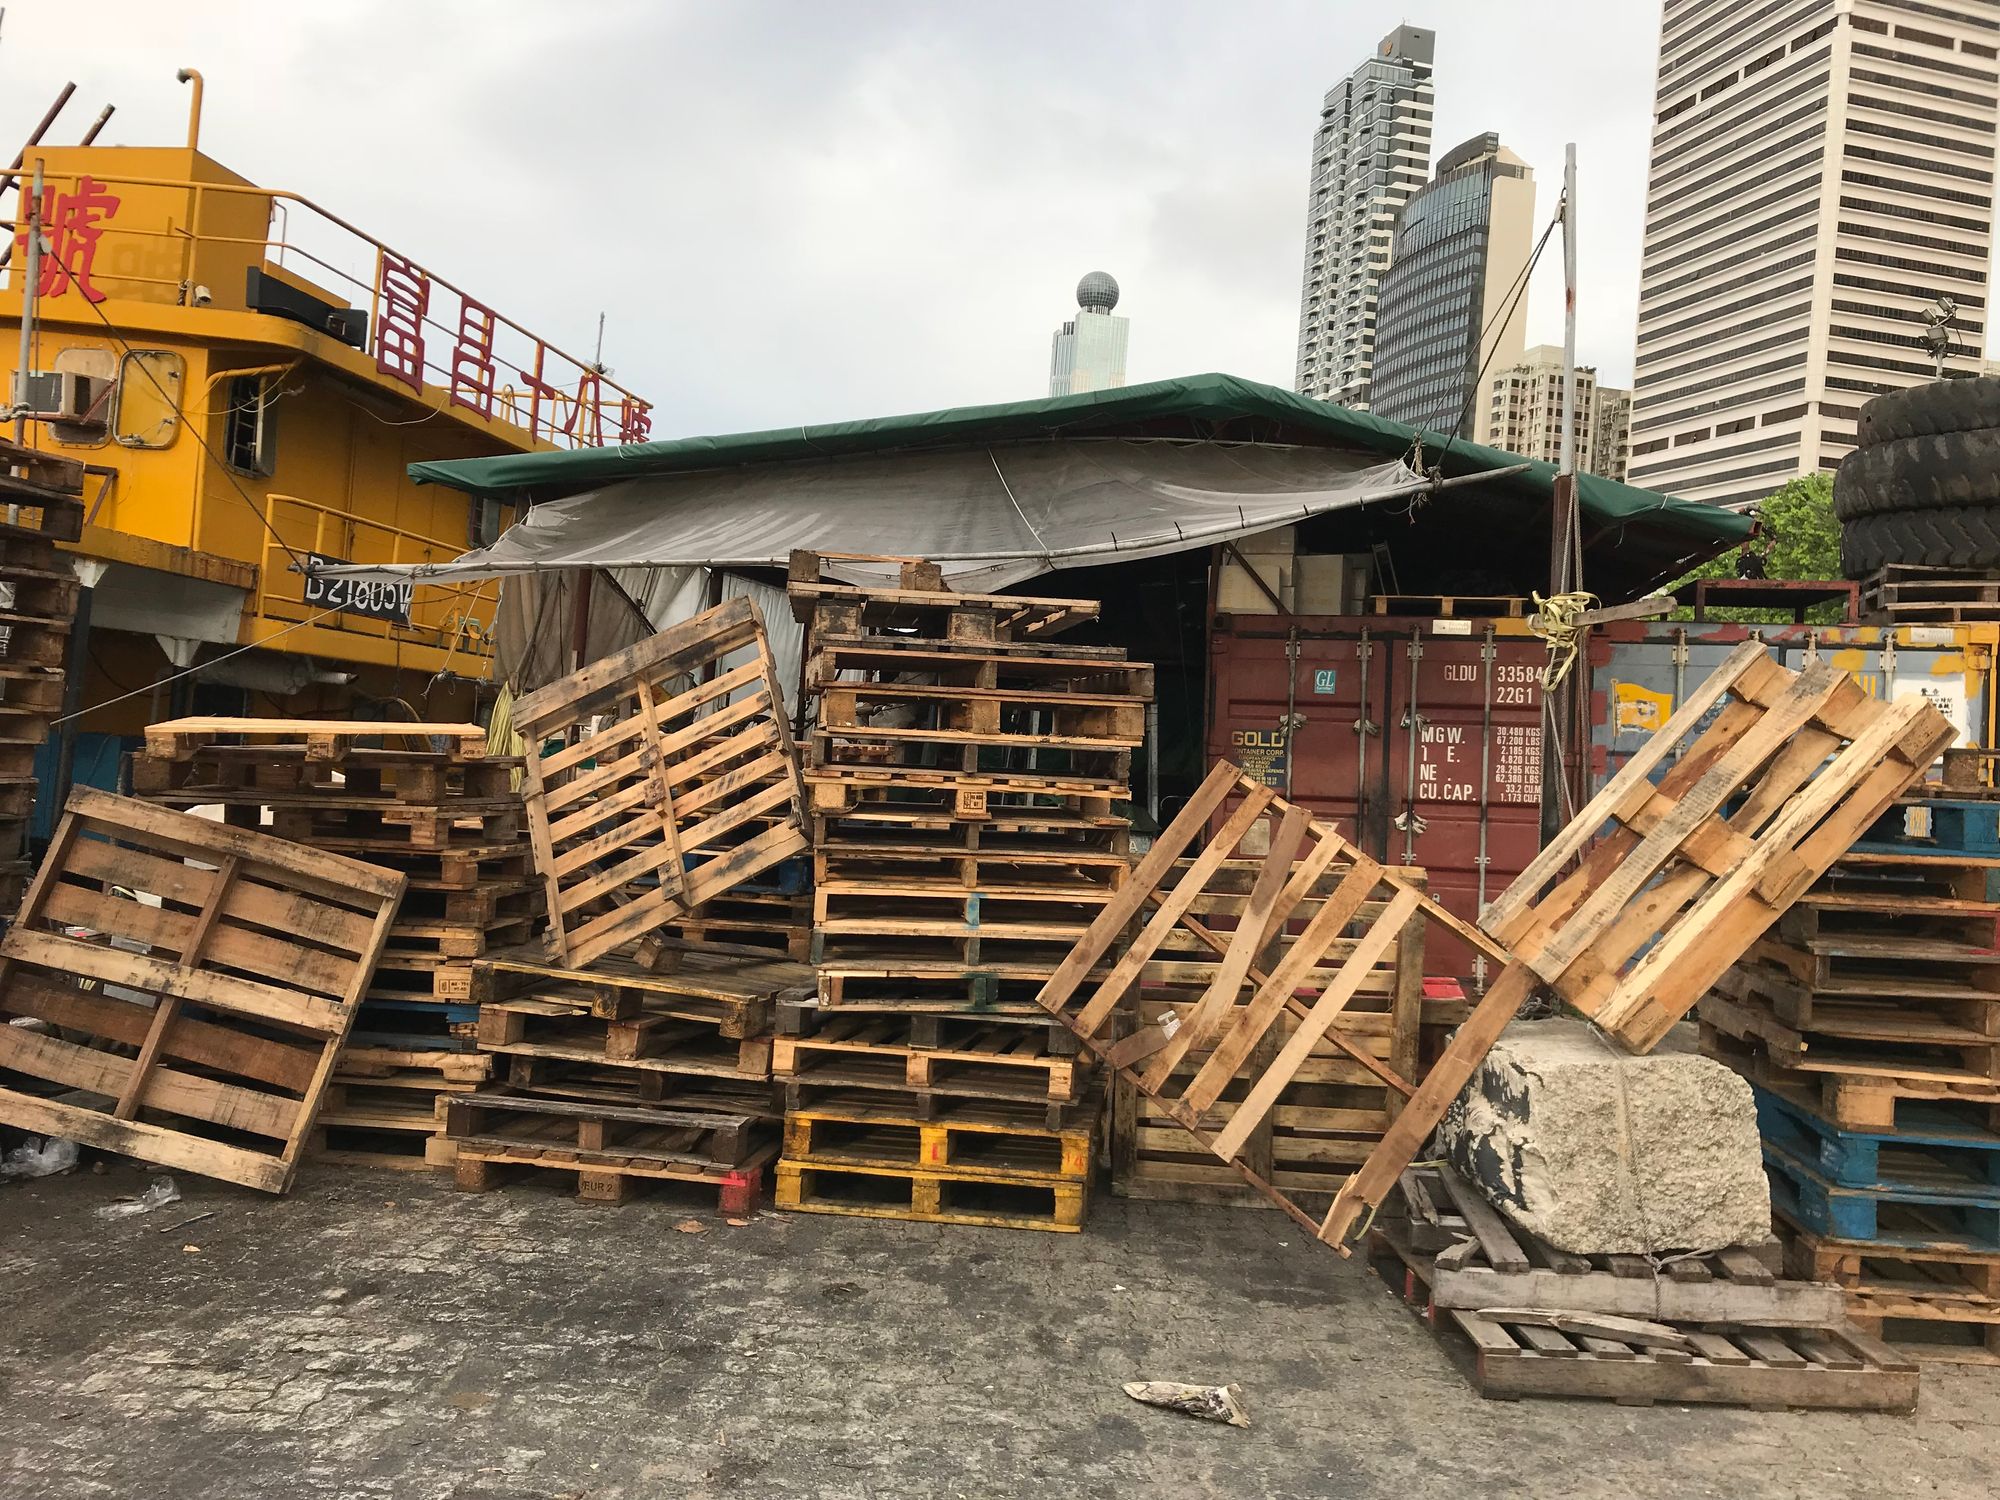 Wooden pallets strewn in front of a make shift shelter on a pier. A tug boat is on the left. 